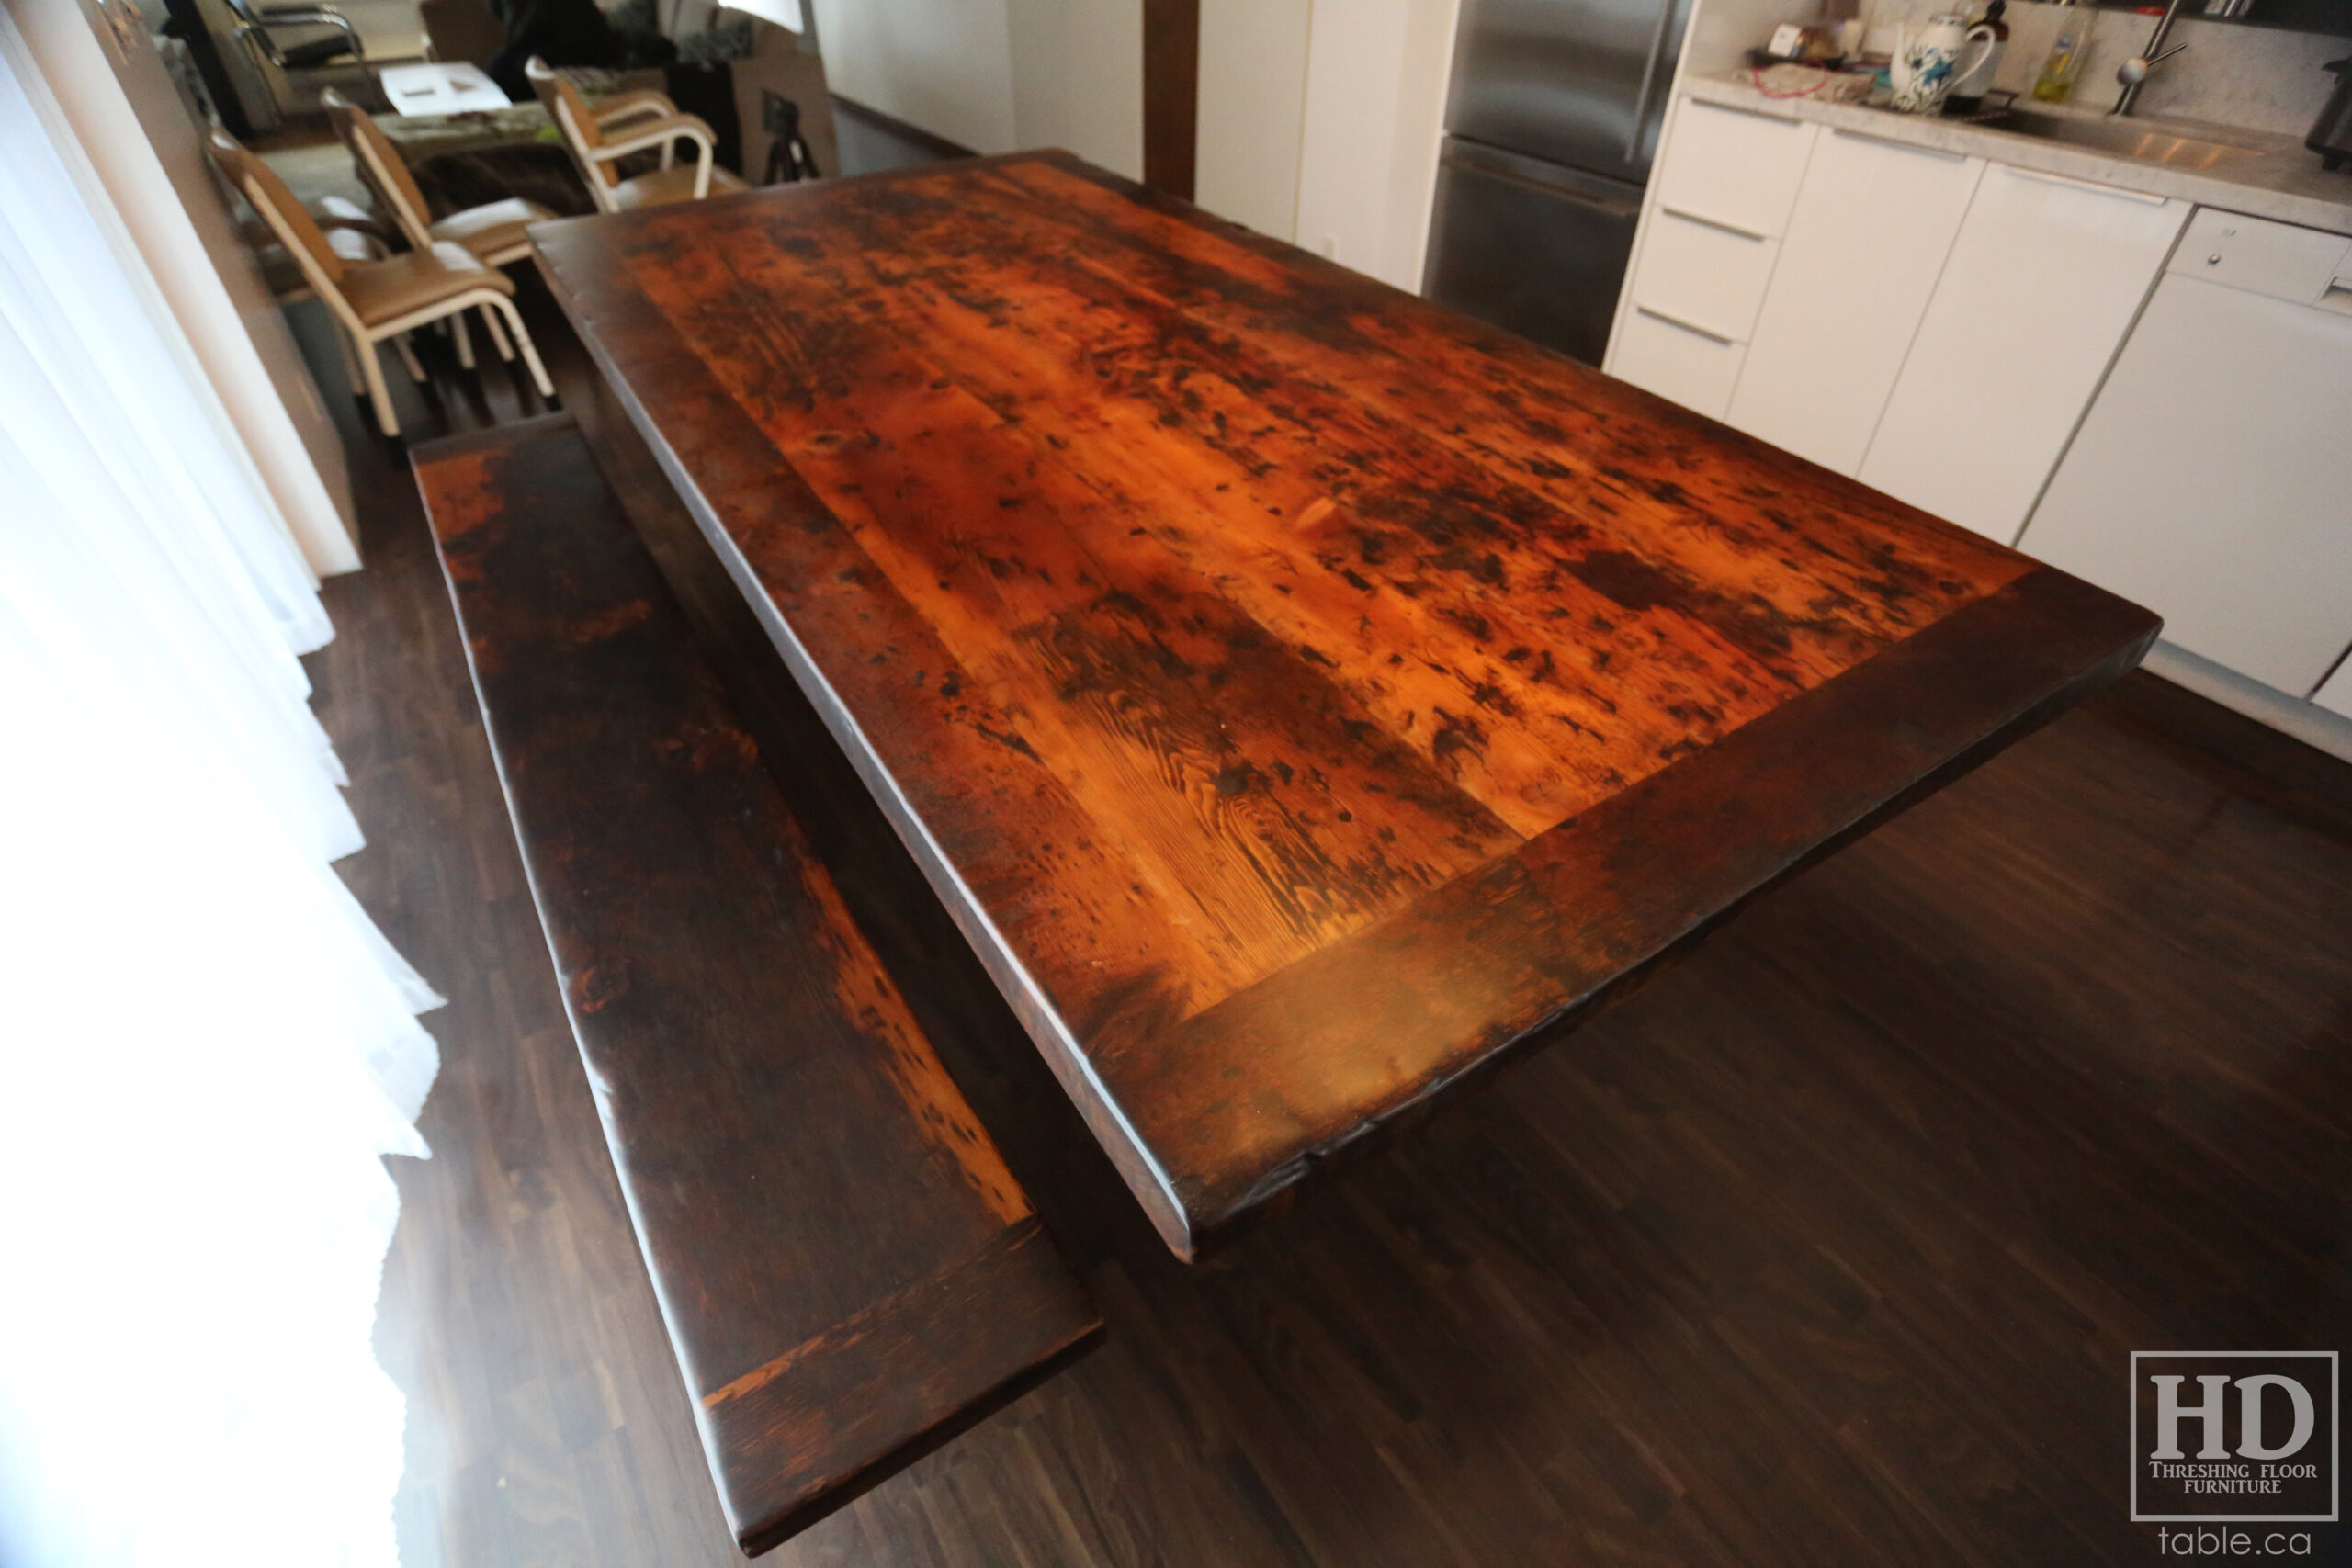 Modern Table made from Reclaimed Wood by HD Threshing Floor Furniture / www.table.ca